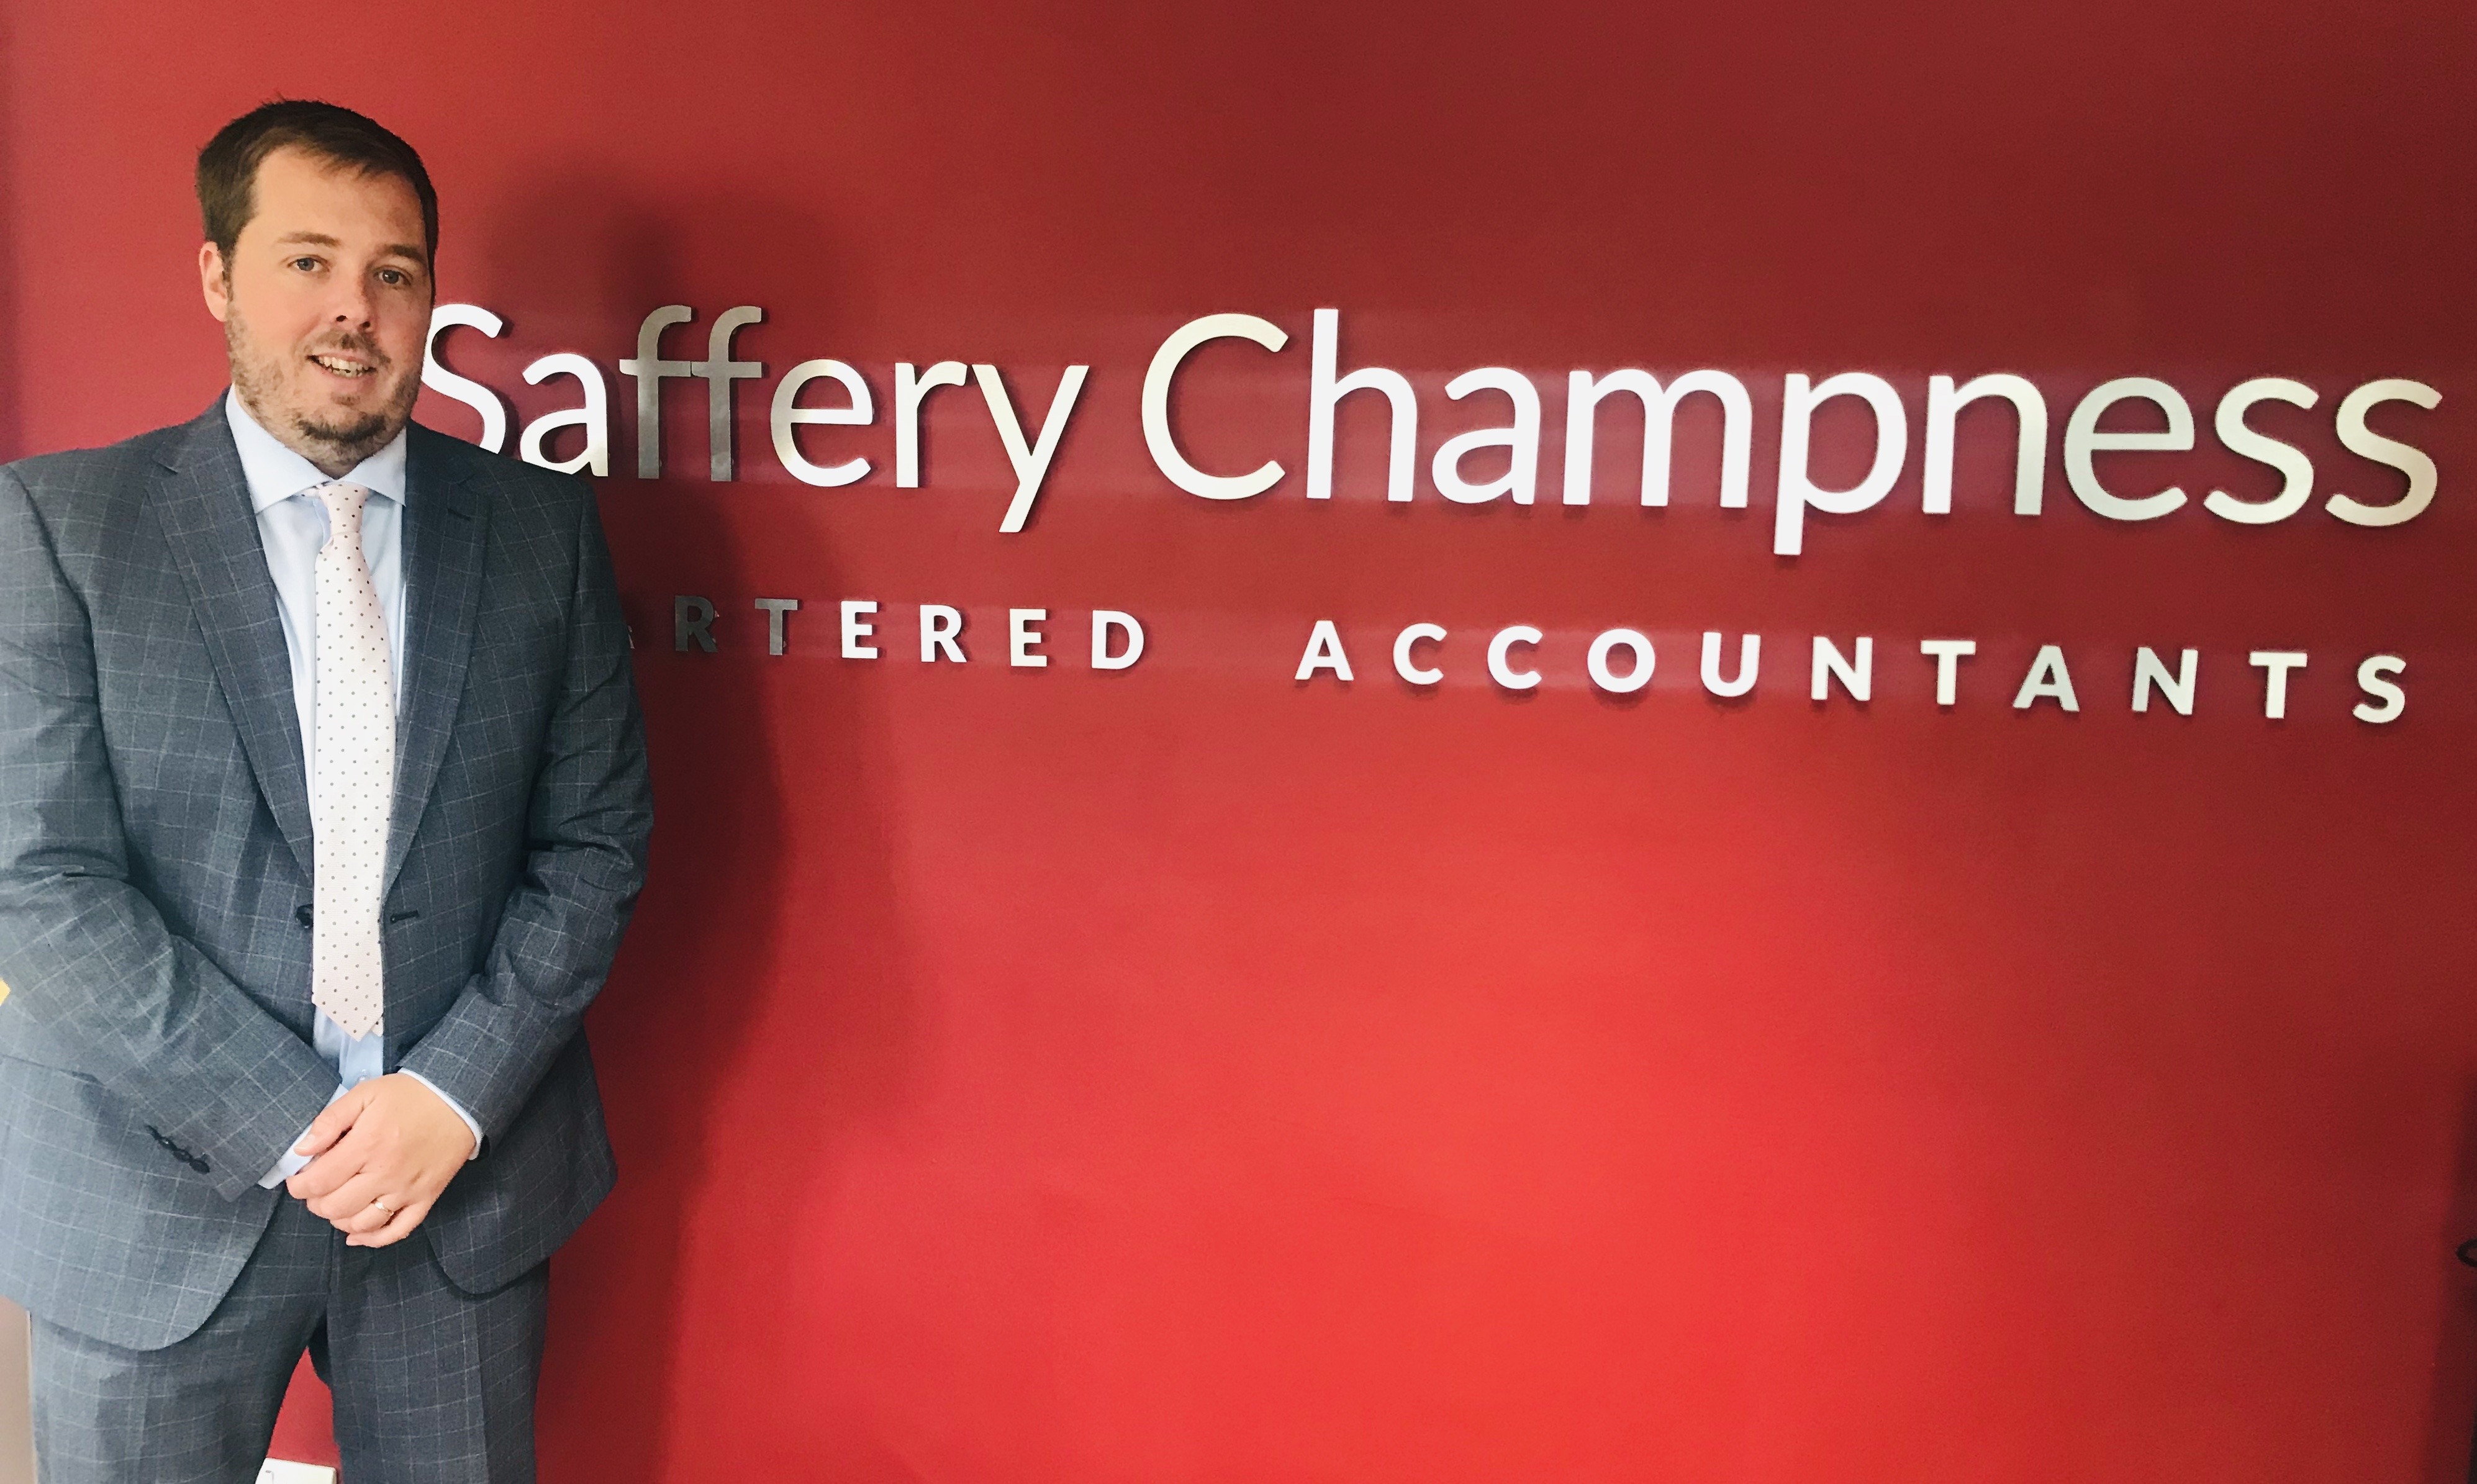 Jamie Lane joins Saffery Champness Chartered Accountants to support entrepreneurs